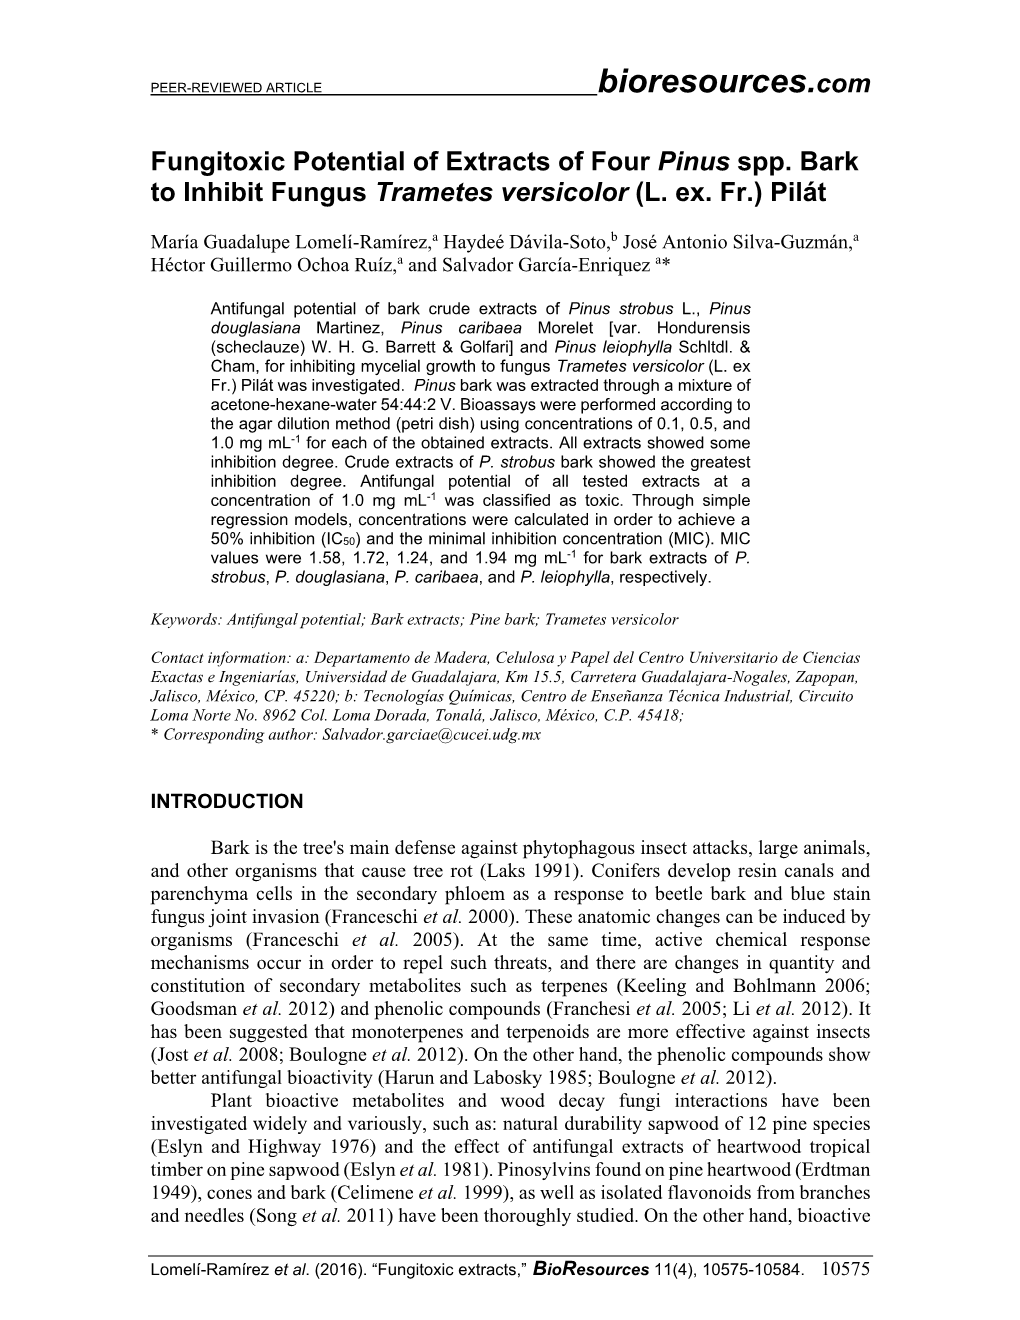 Fungitoxic Potential of Extracts of Four Pinus Spp. Bark to Inhibit Fungus Trametes Versicolor (L